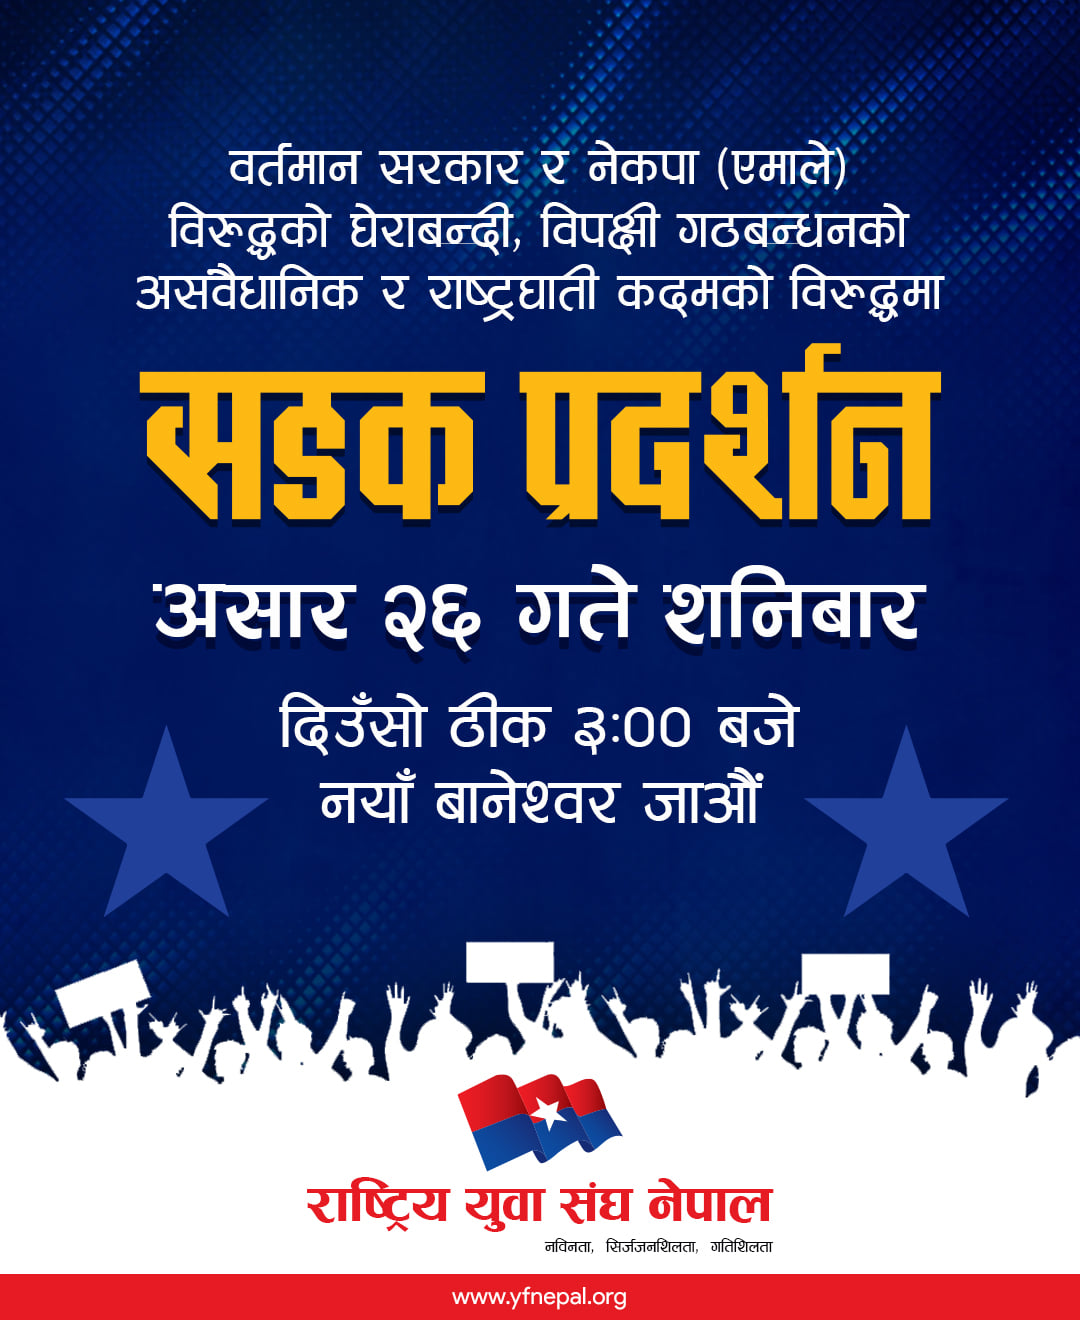 Pro-government NYFN to protest against the opposition alliance on Sunday